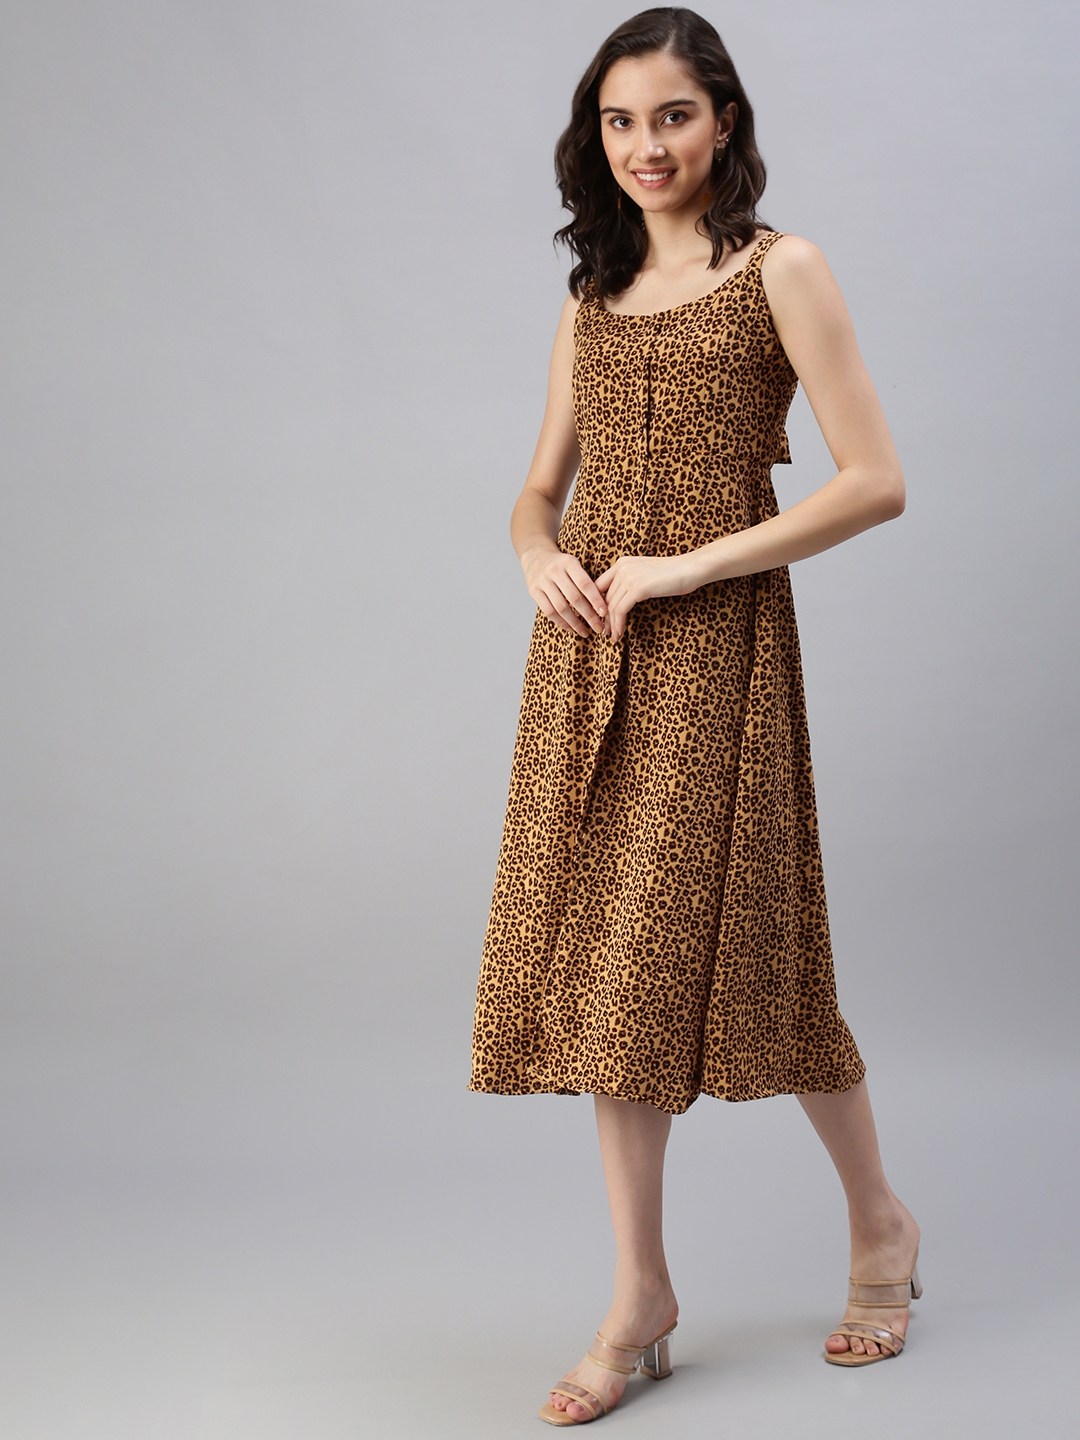 Women's Brown Polyester Printed Dresses